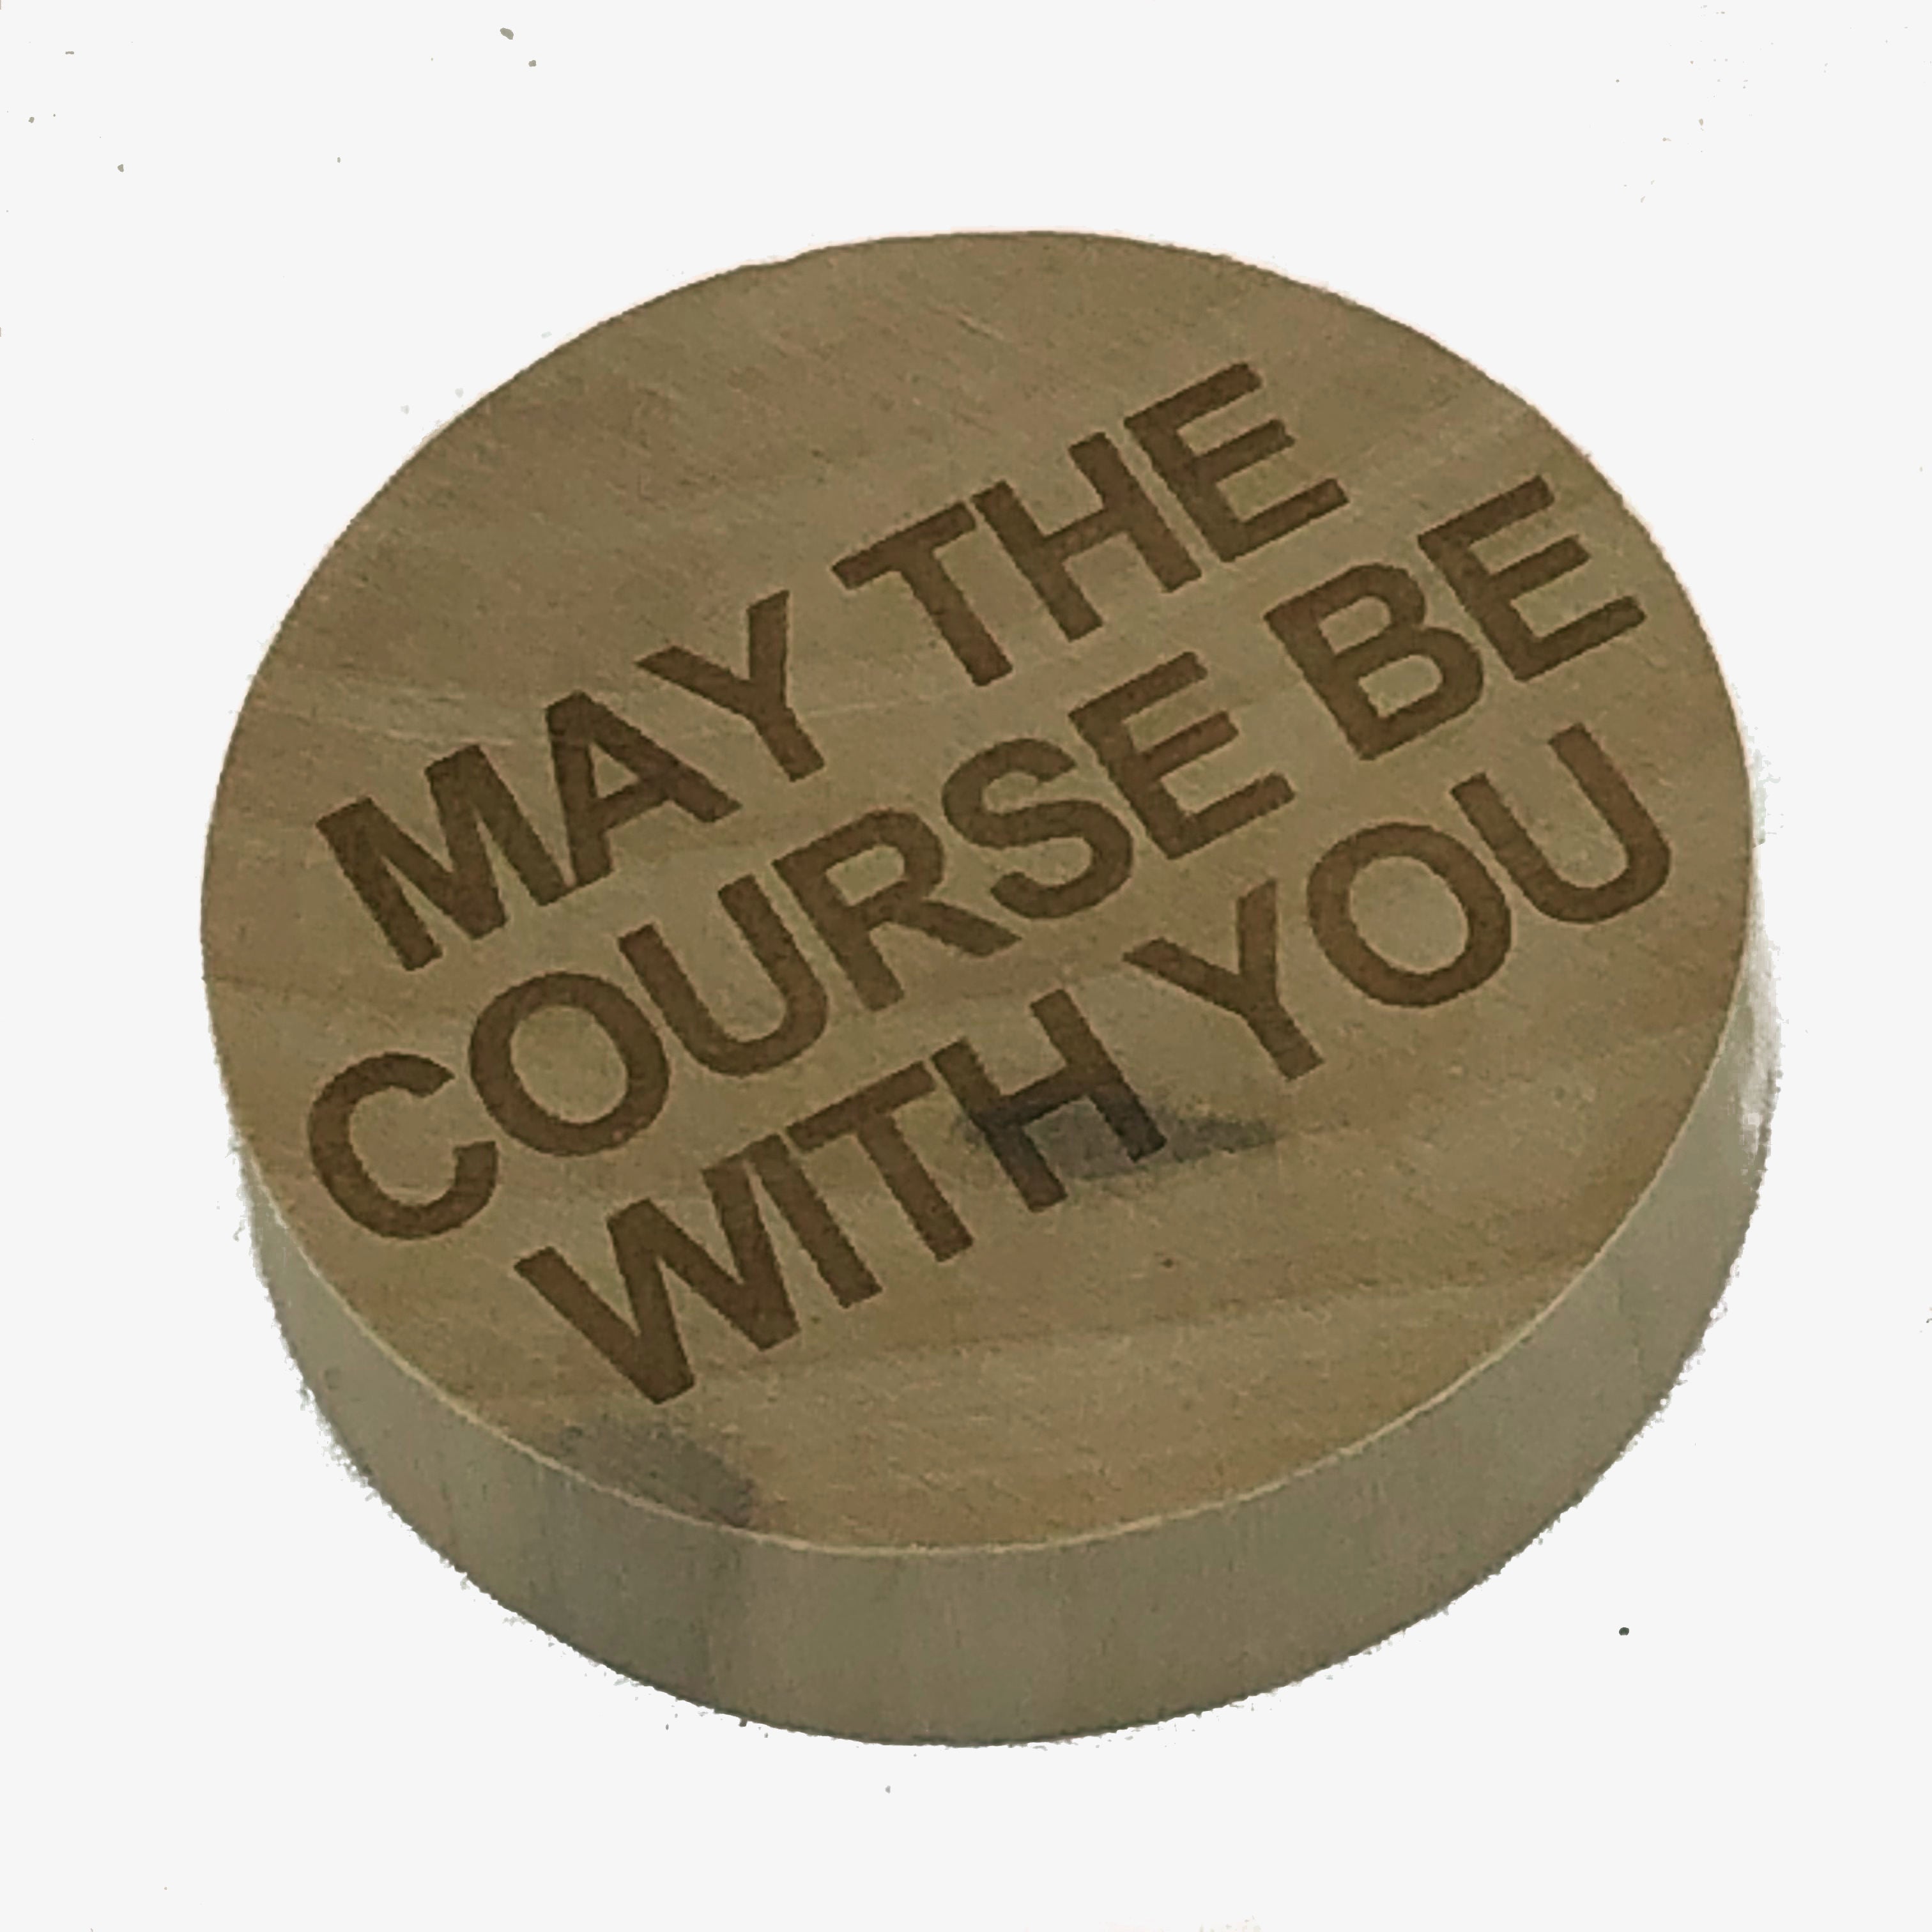 Wooden fridge magnet bottle opener - golf - may the course be with you